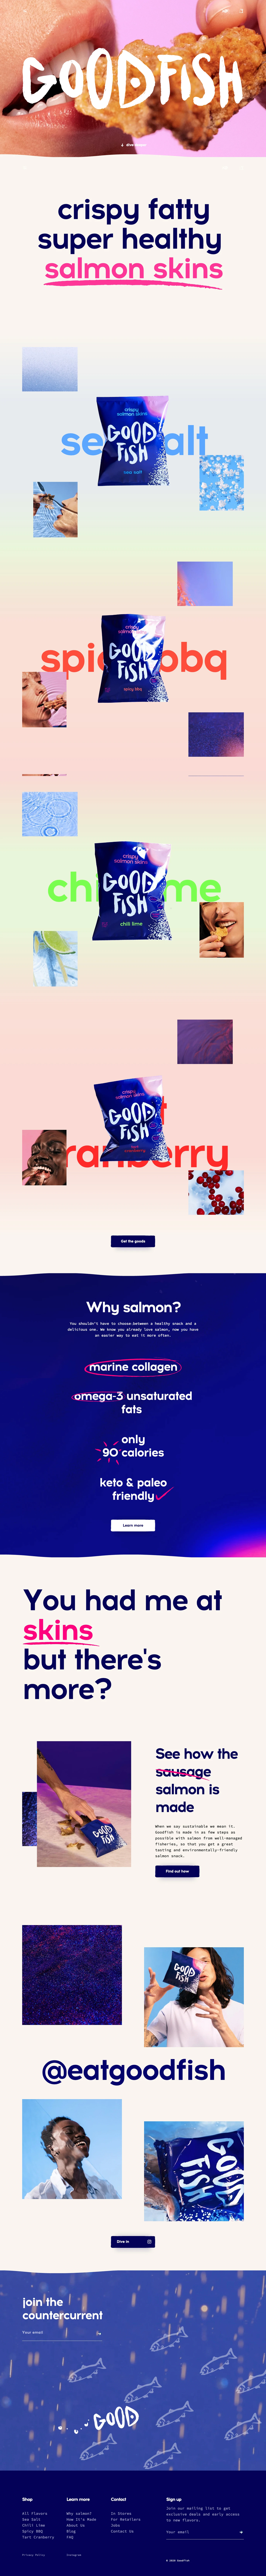 Goodfish Landing Page Example: A pioneering and momentous initiative, GOODFISH, is changing the way we think about snacking with the launch of the first 100% traceable Wild Alaska Sockeye crispy salmon skin chips propelling sustainable seafood into mass market culture.